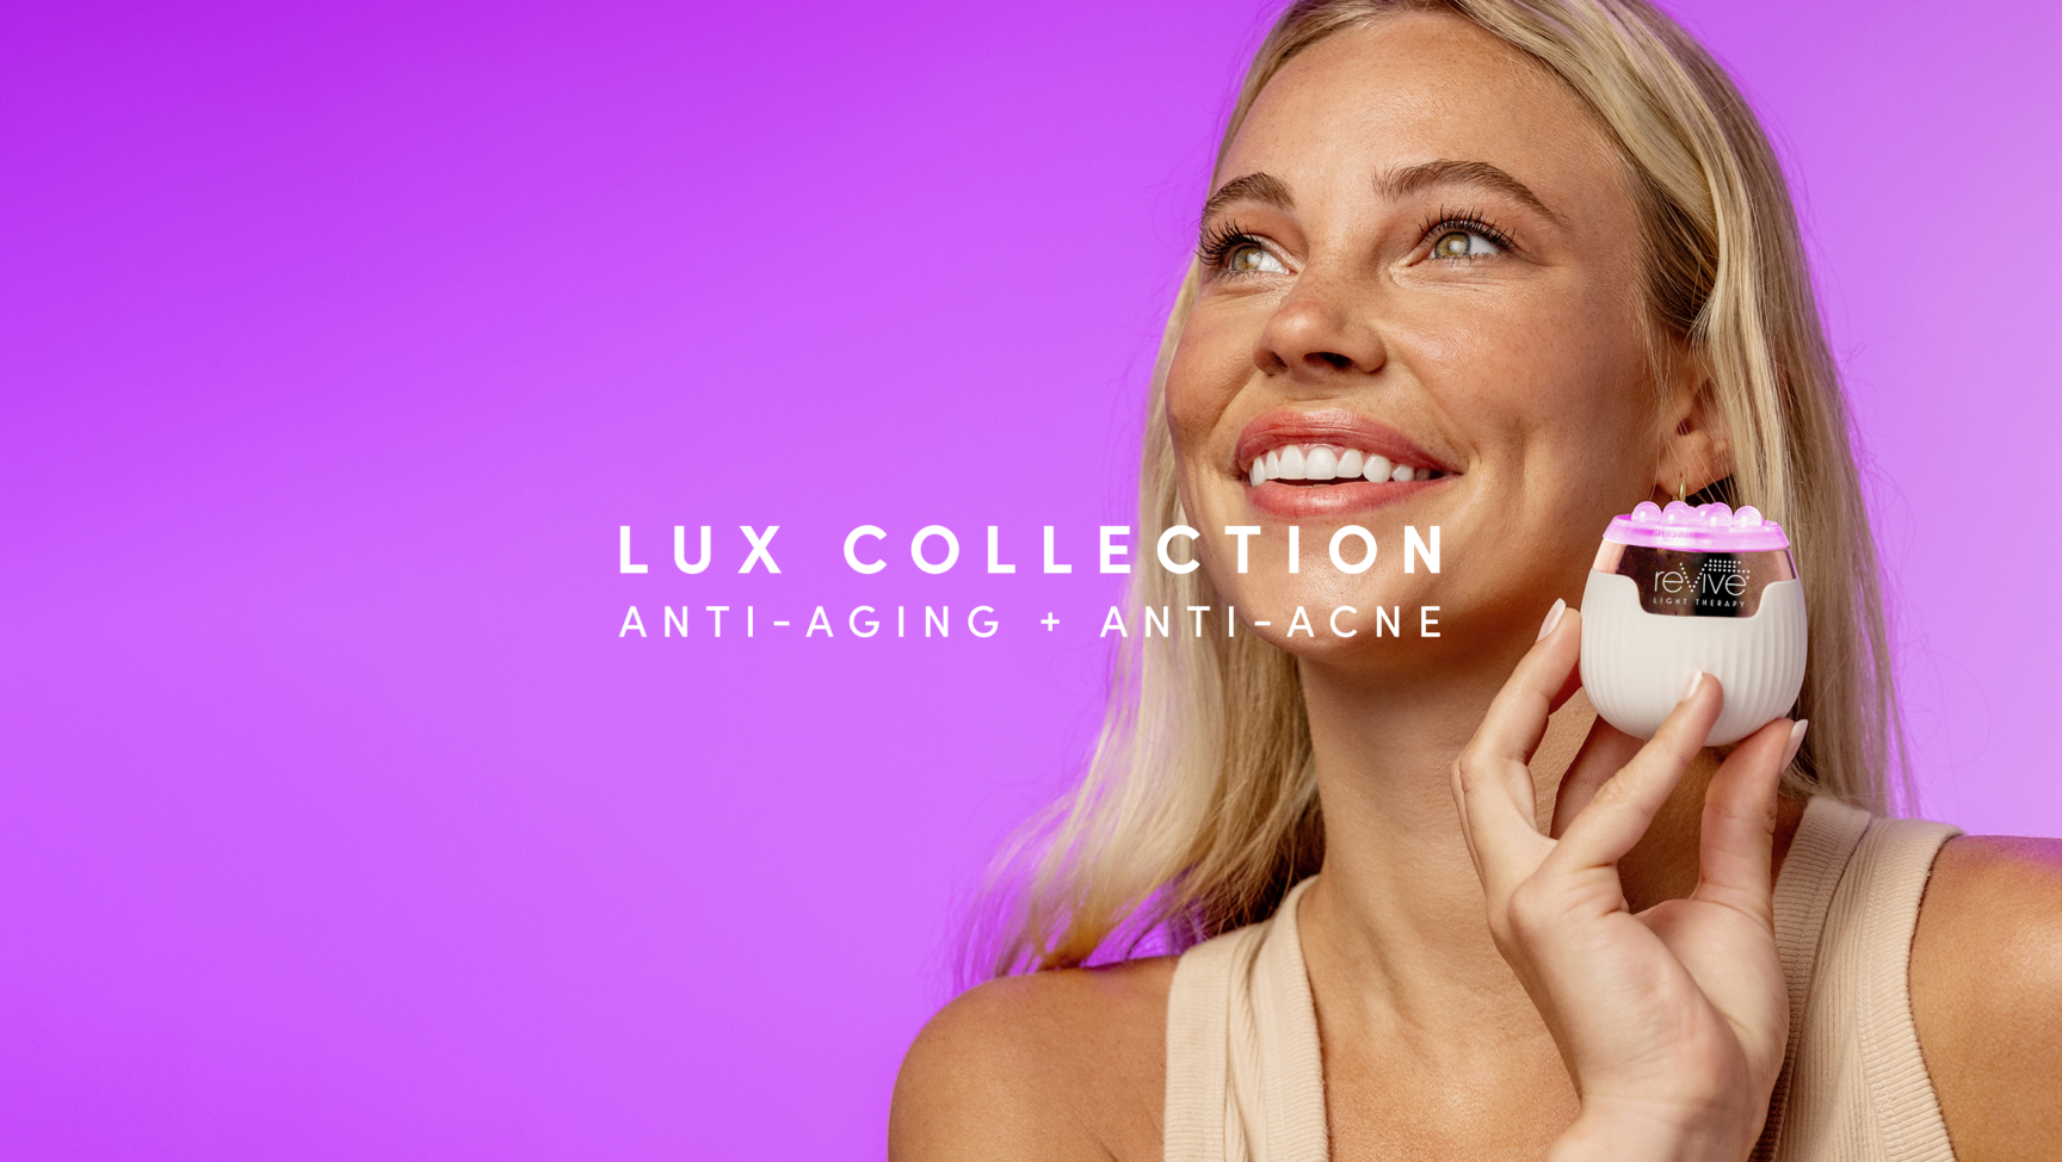 Blonde woman with a 'reVive Light Therapy' device and 'LUX COLLECTION - ANTI-AGING + ANTI-ACNE' text.